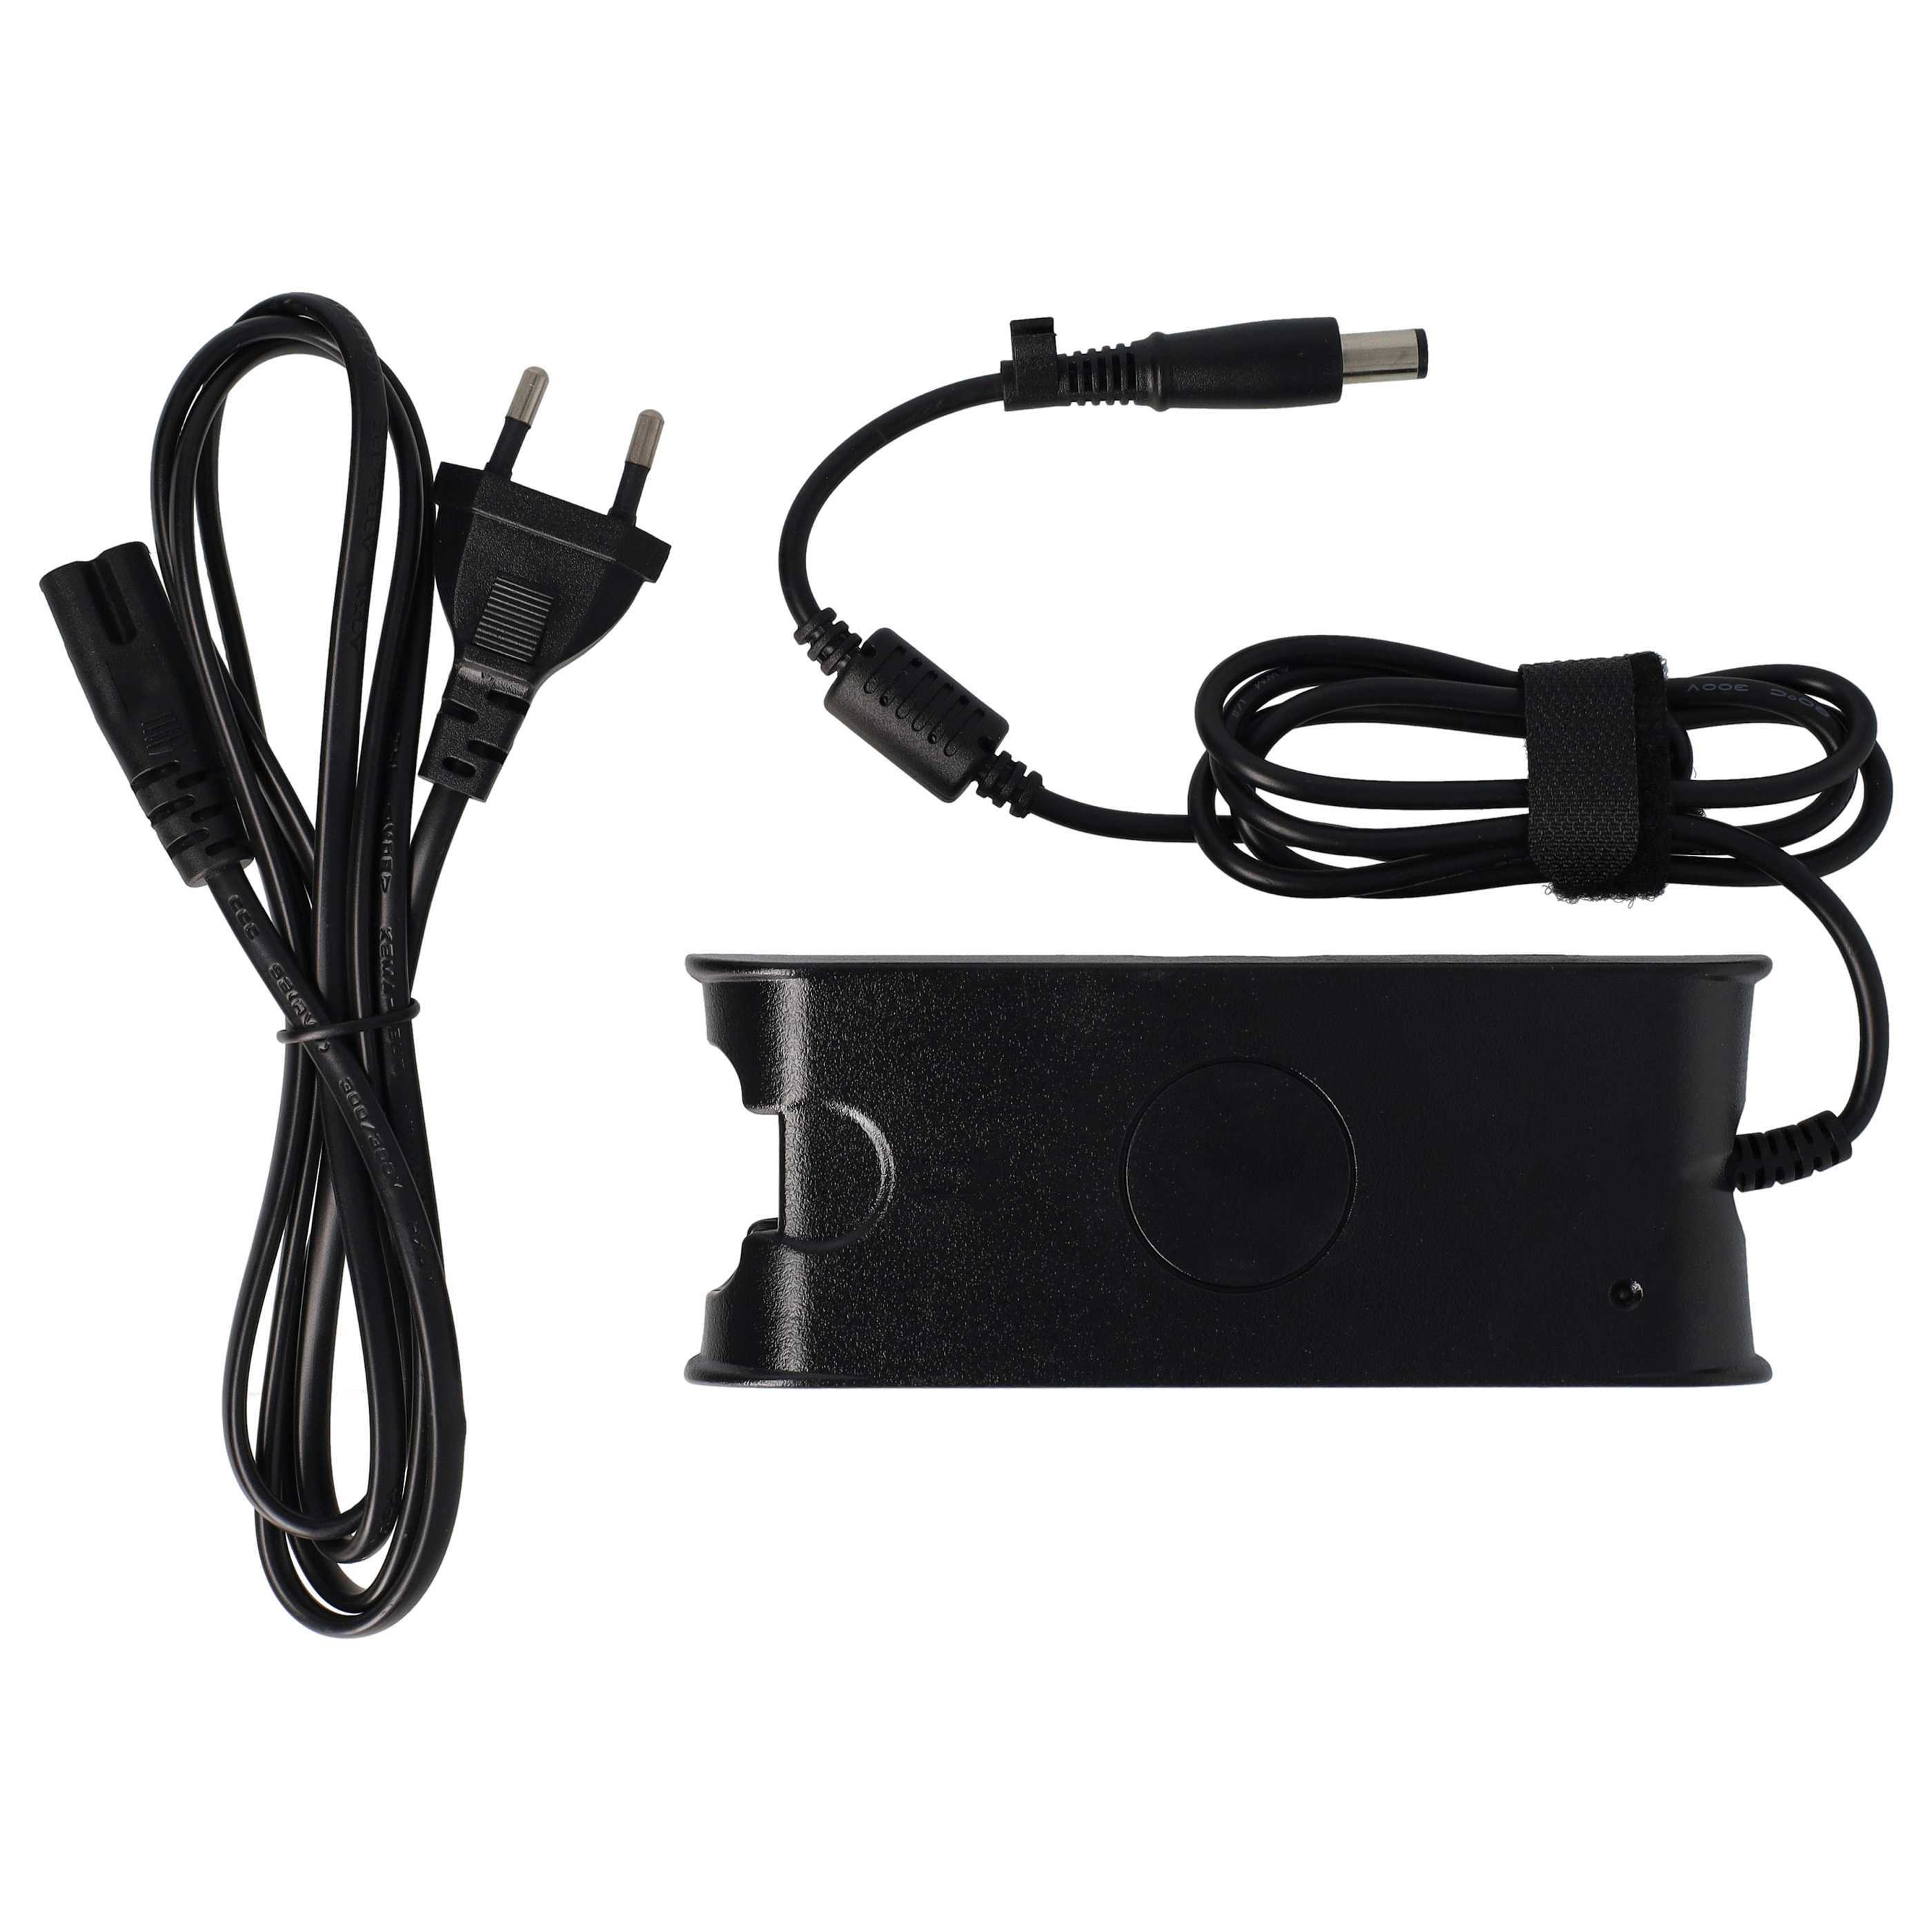 Mains Power Adapter replaces Dell 0RM809, 0RM805, 09T215, 02H098, 310-2862, 0F266 for DellNotebook, 90 W